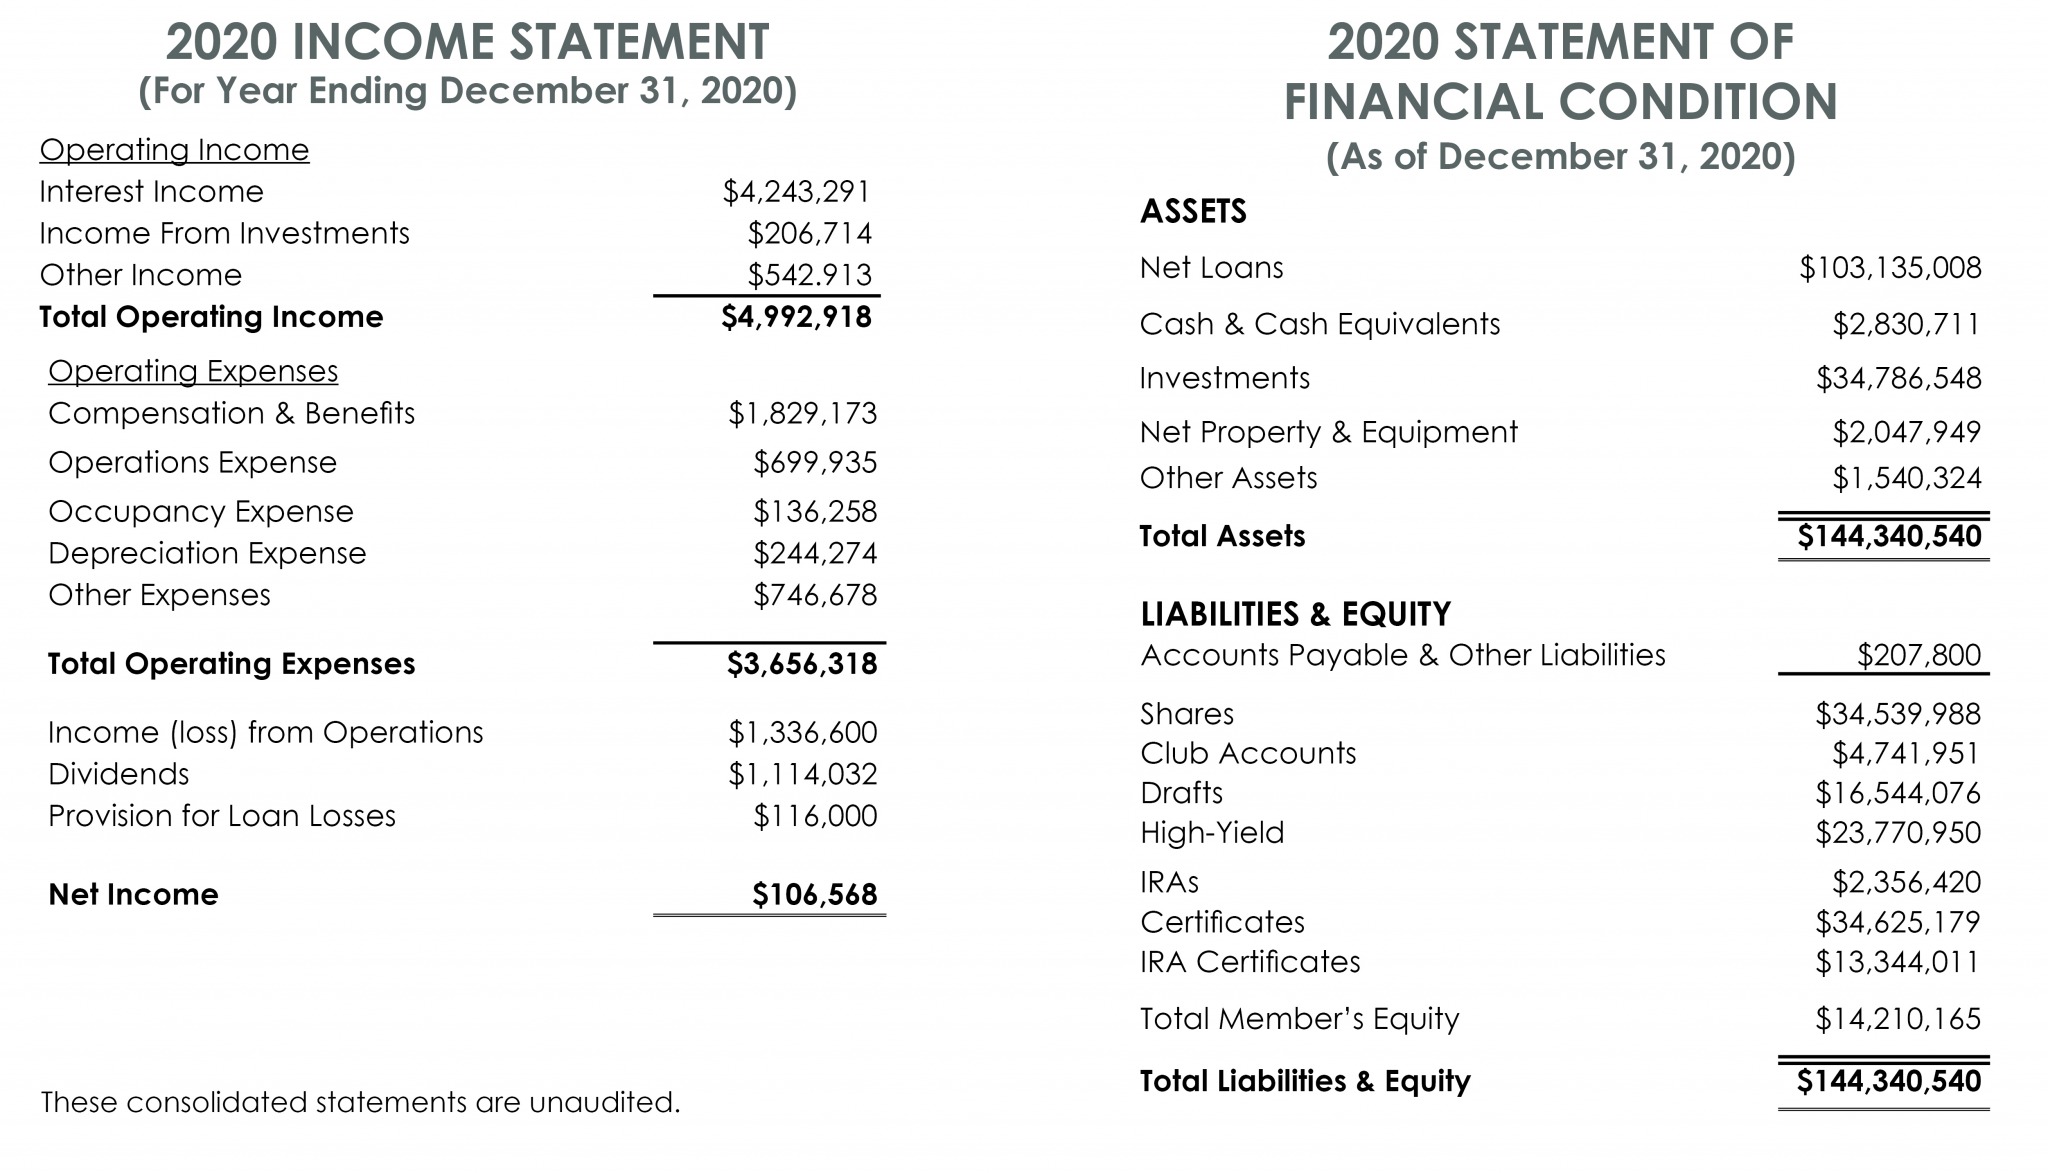 2020 Consolidated Statements